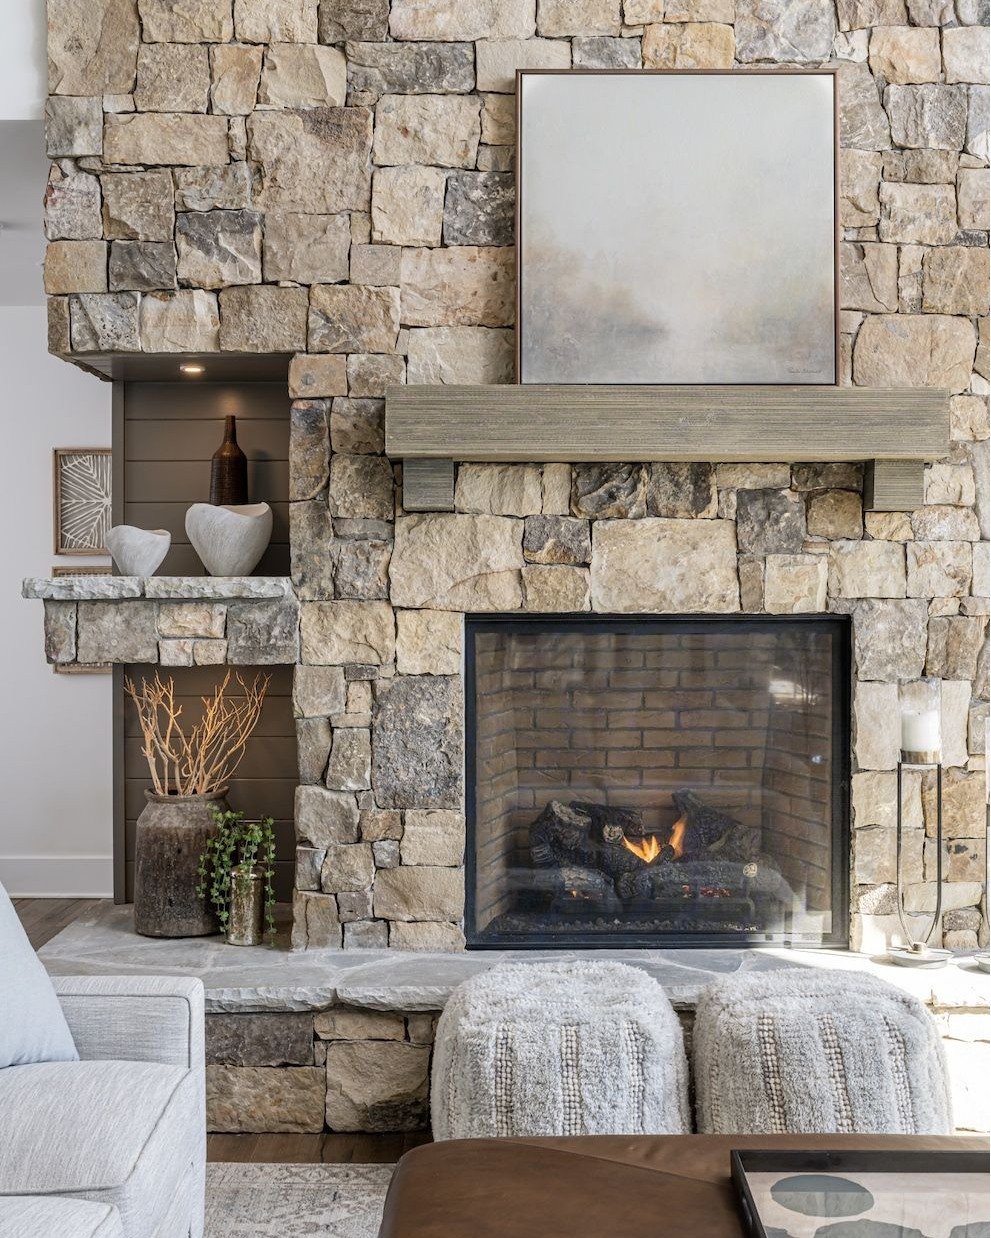 Turn up the Detail from the hearth to the mantel, every detail matters🔍. We're committed to creating fireplaces that inspire. #DetailsMatter💫

📷: Pinterest

#sweepsnladders #fireplacerenovation #chimneysweeper  #fireplaceremodel  #fireplacesafety 